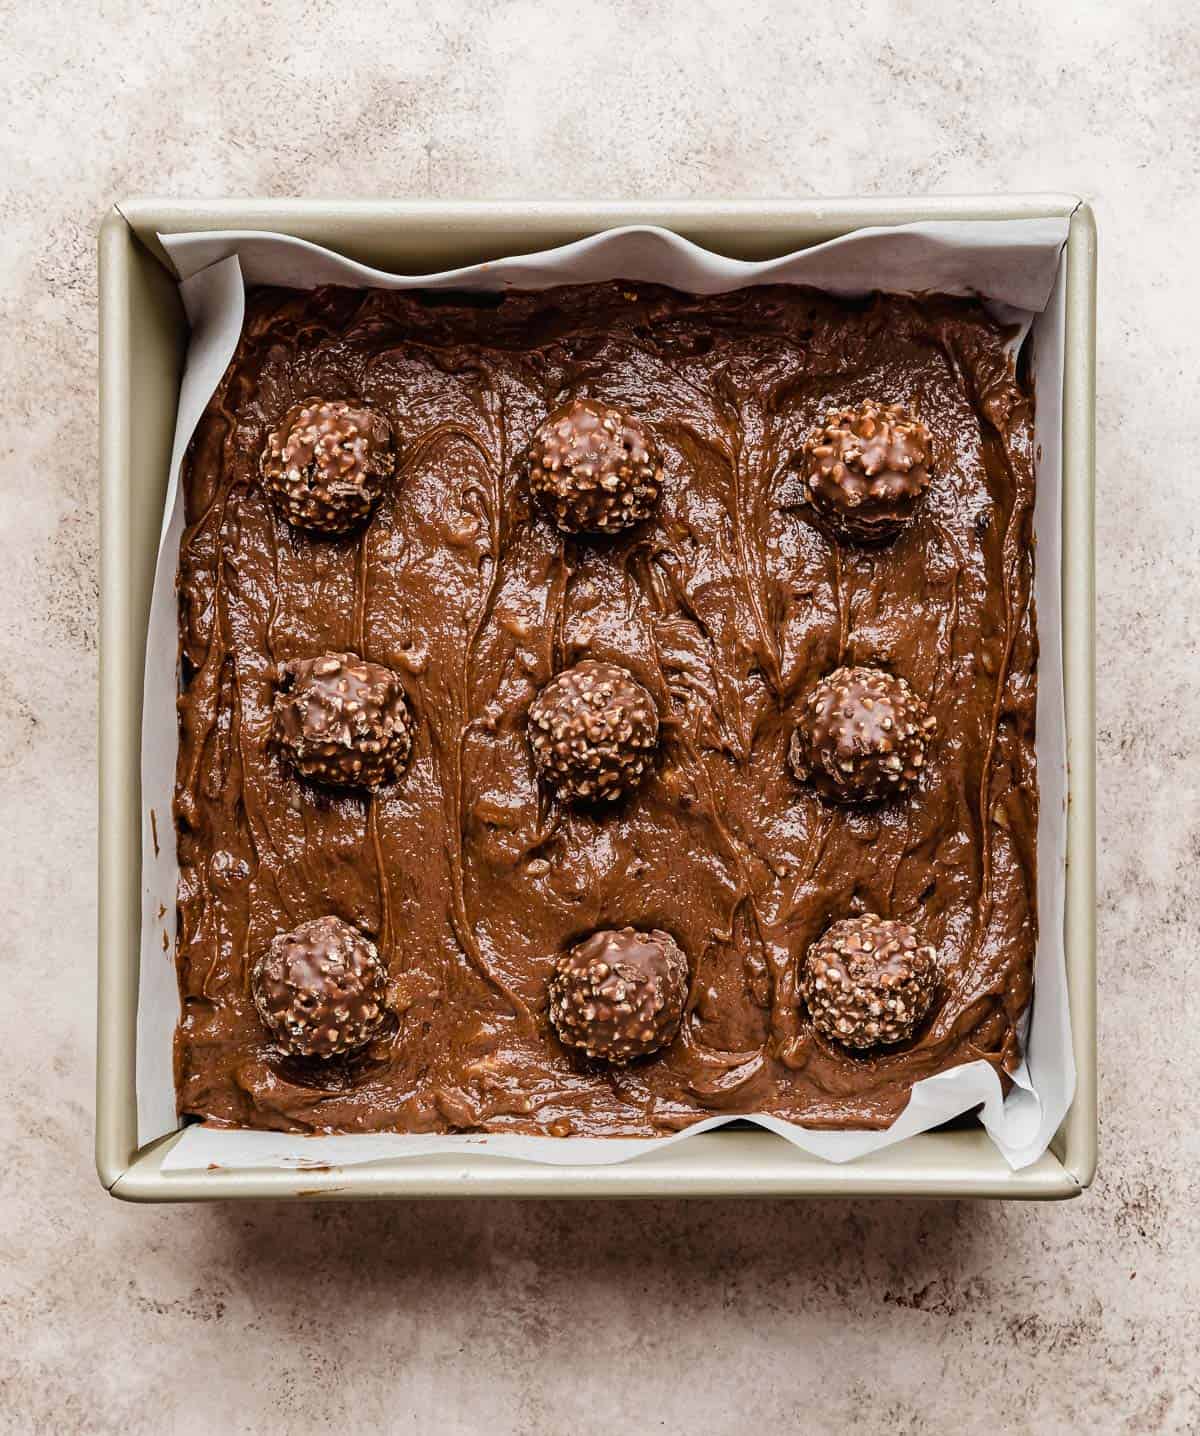 9 Ferrero Rocher's stuck on the top of brownie batter in a square pan.